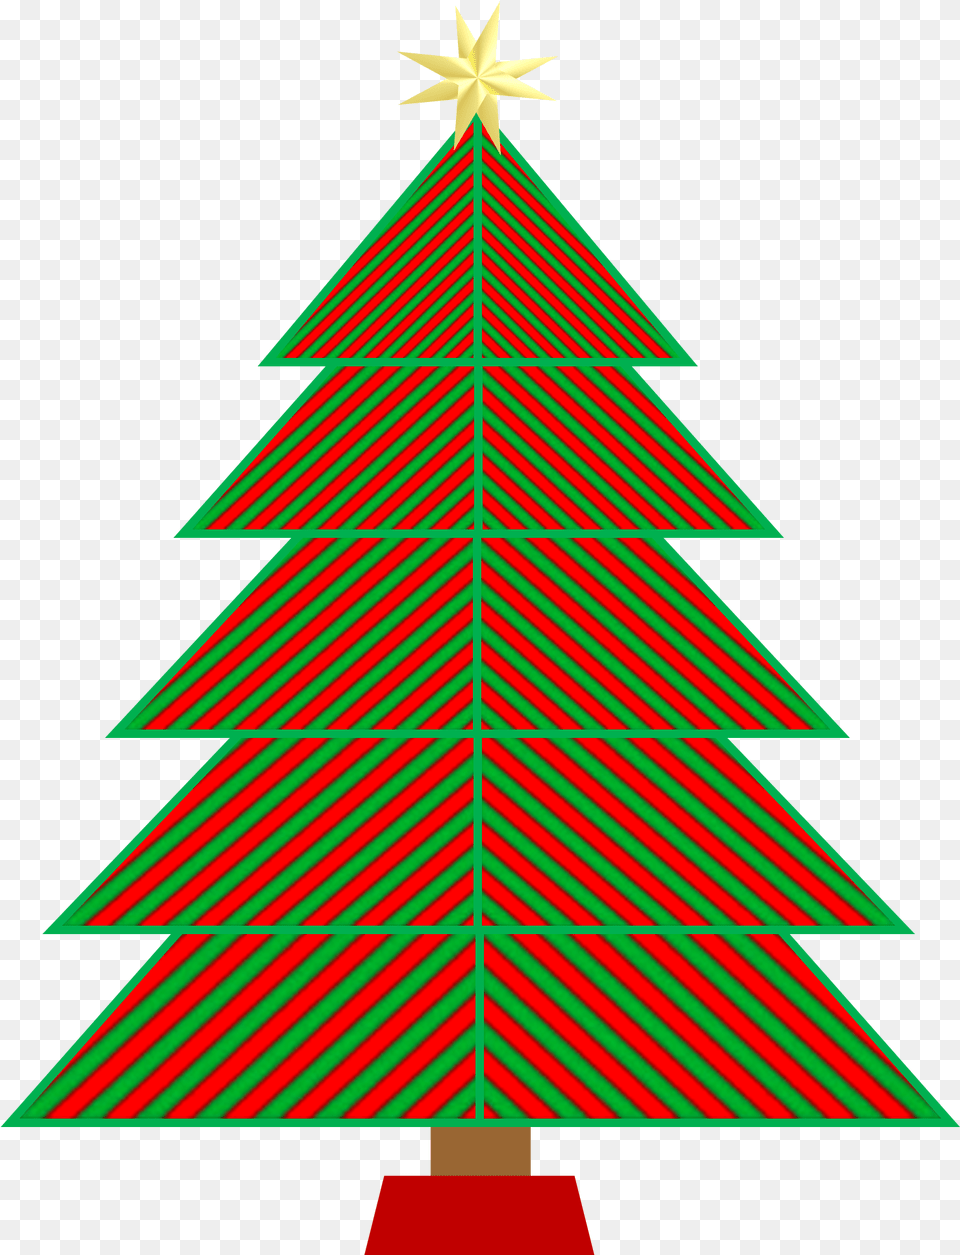 Green Striped Christmas Tree Icon Draw Perfect Christmas Tree, Christmas Decorations, Festival, Christmas Tree, Rocket Png Image